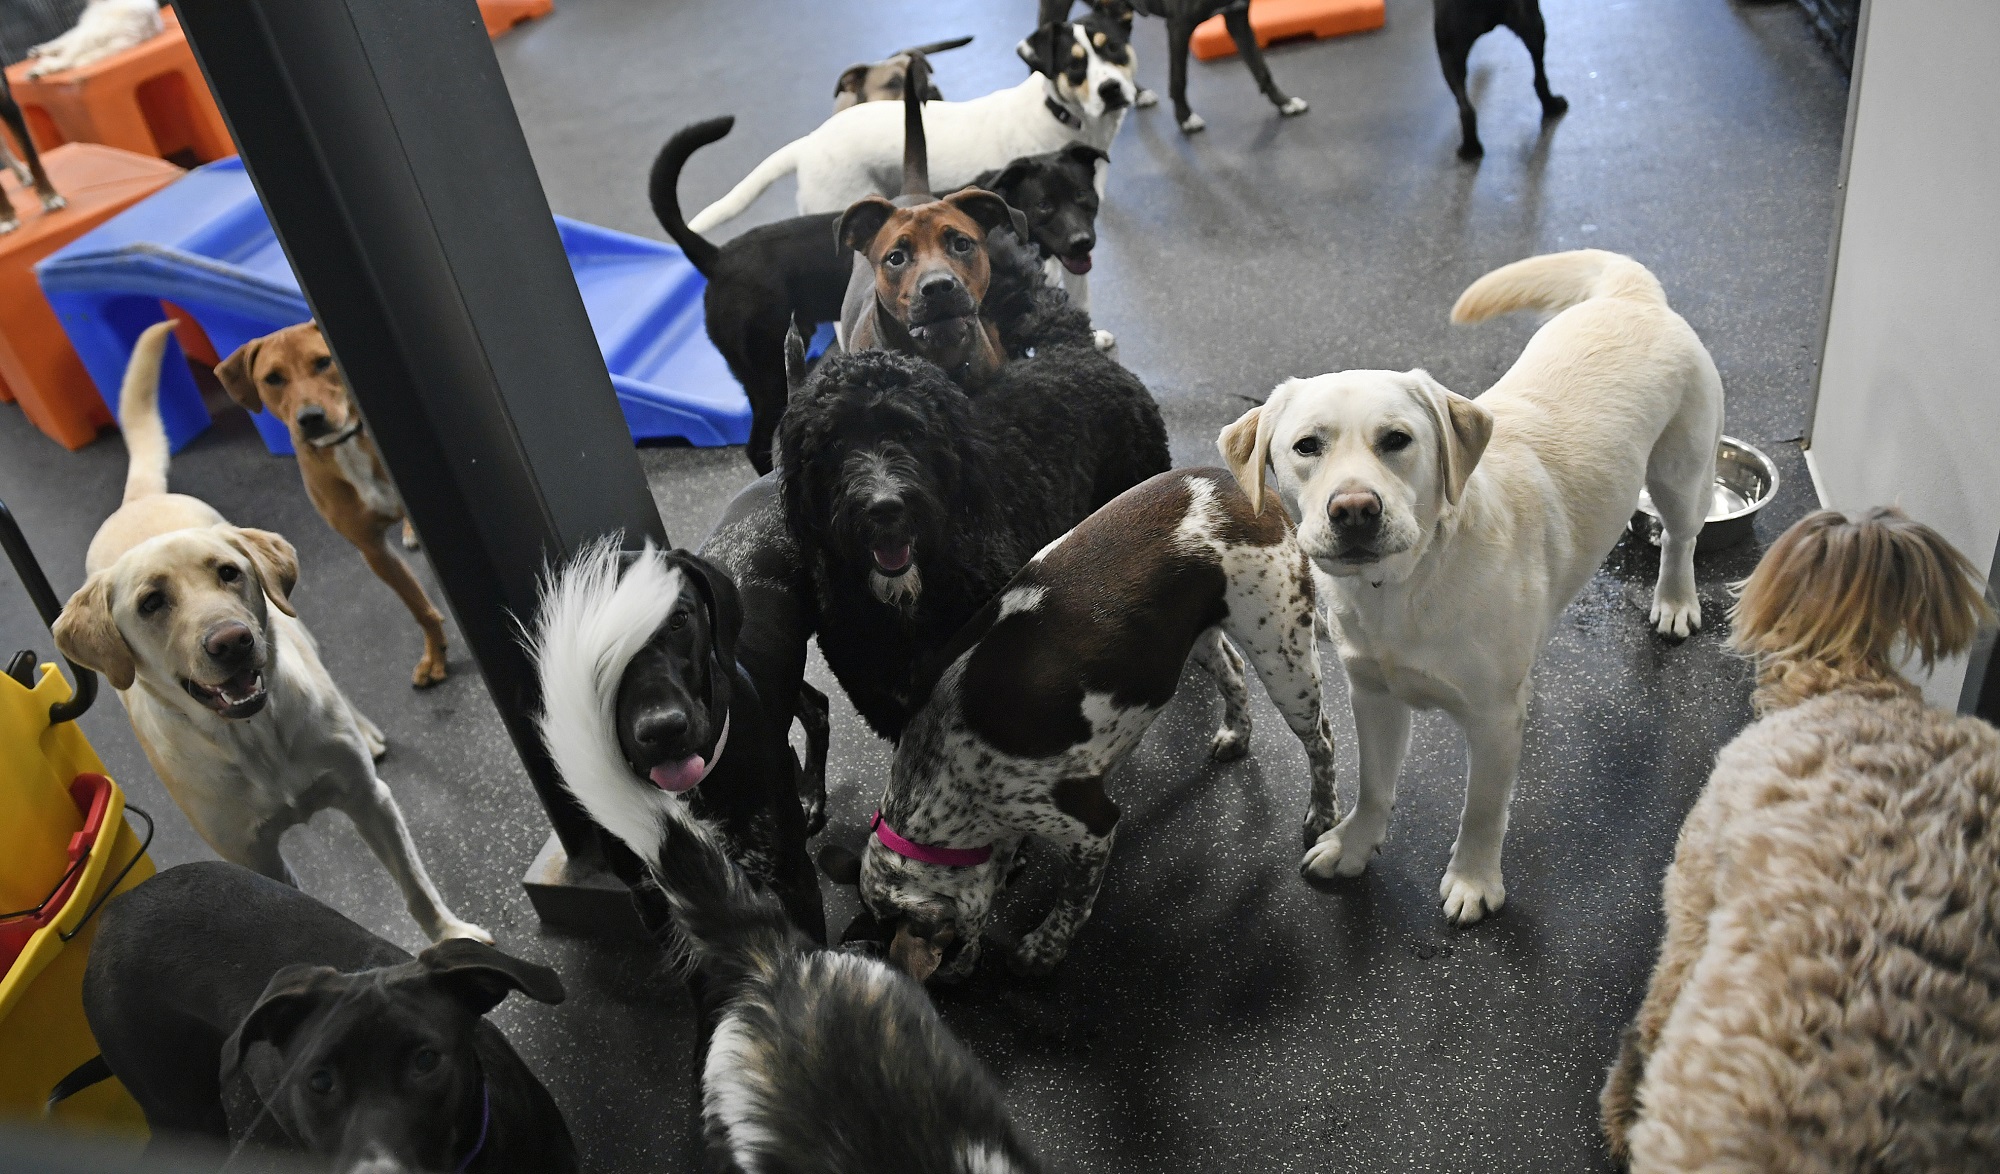 Dogs gather in a playroom at Dogtopia in Fort Collins.